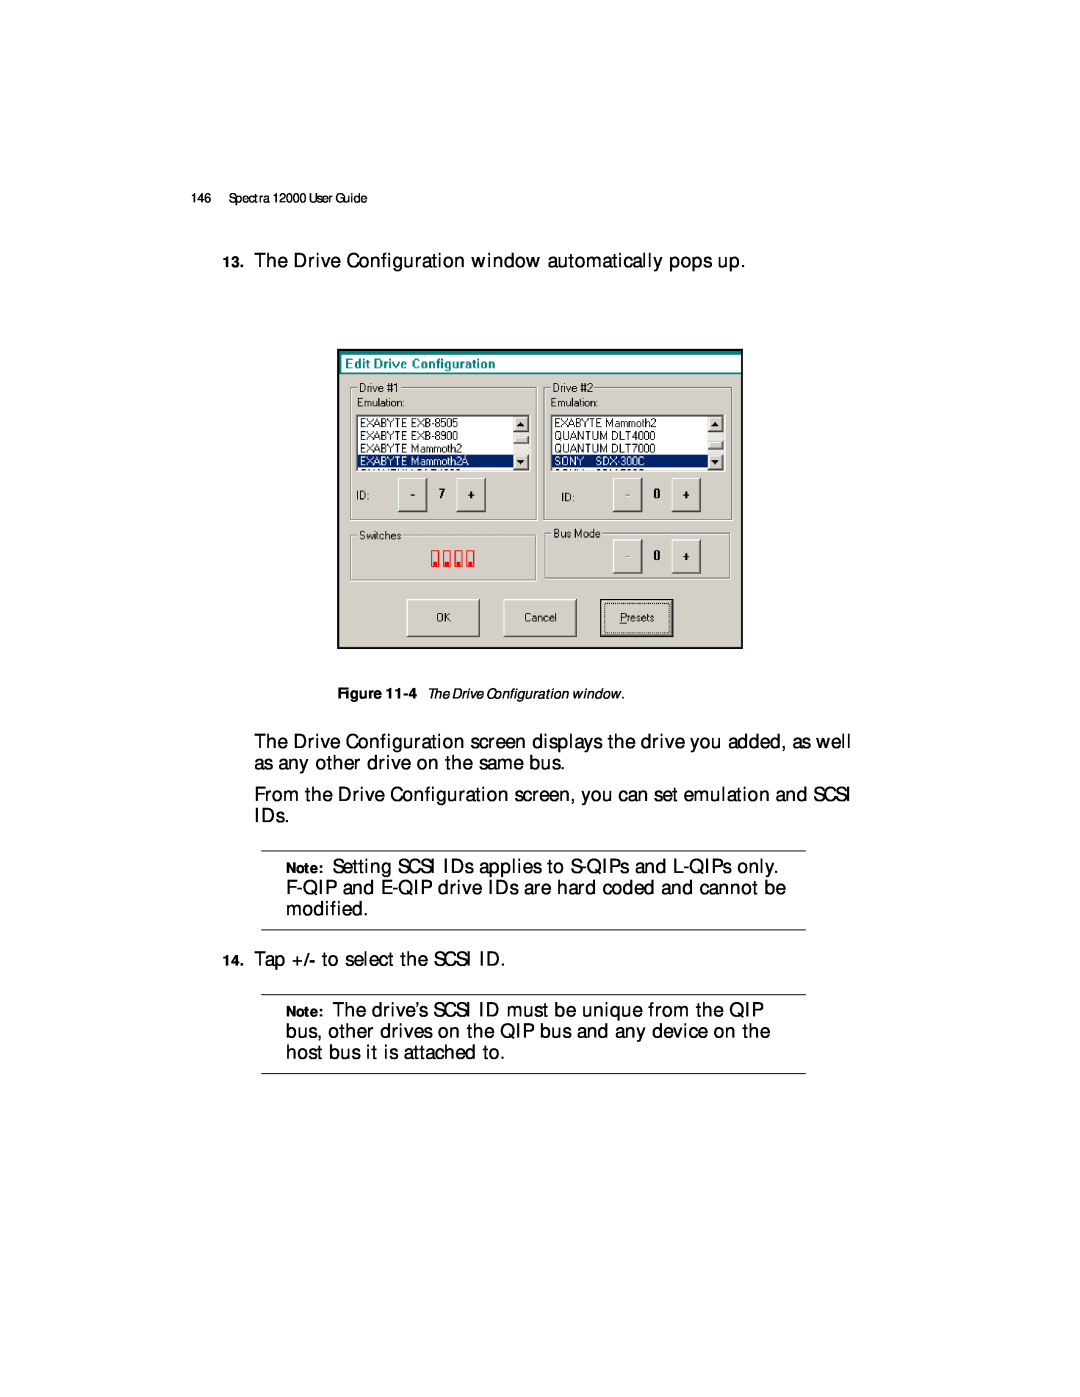 Spectra Logic manual 4 The Drive Configuration window, Spectra 12000 User Guide 